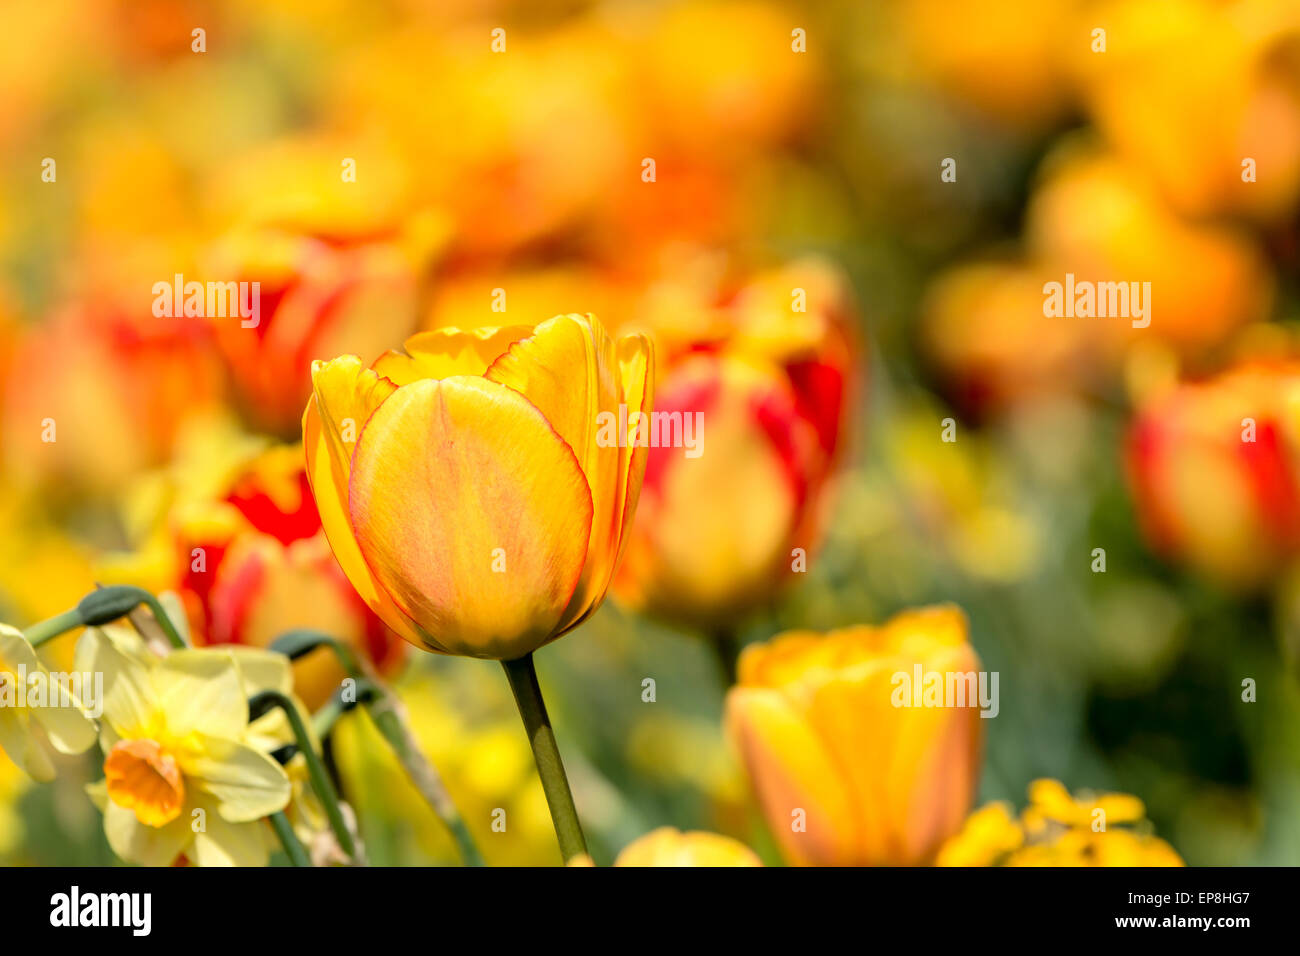 Tulip (Tulipa). Focus on one orange flower in a flowerbed of tulips as background. Stock Photo